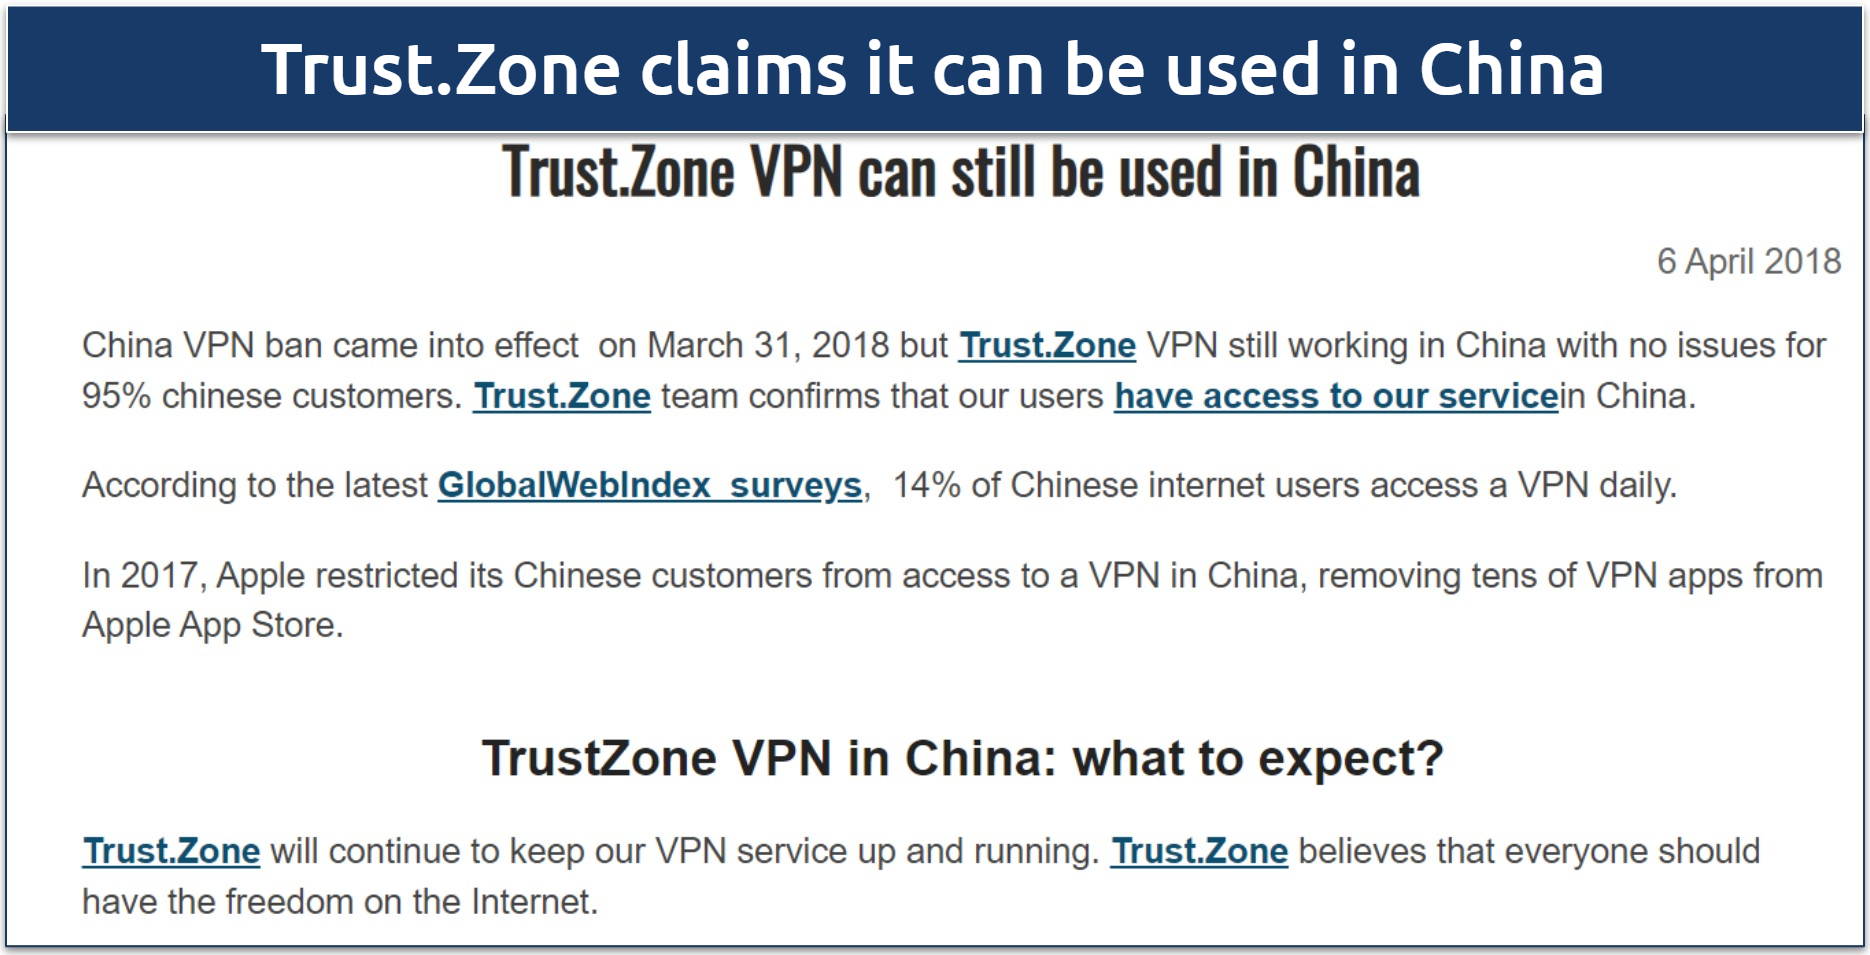 Screnshot of a page on Trust.Zone's site where it claims it can still be used in China 